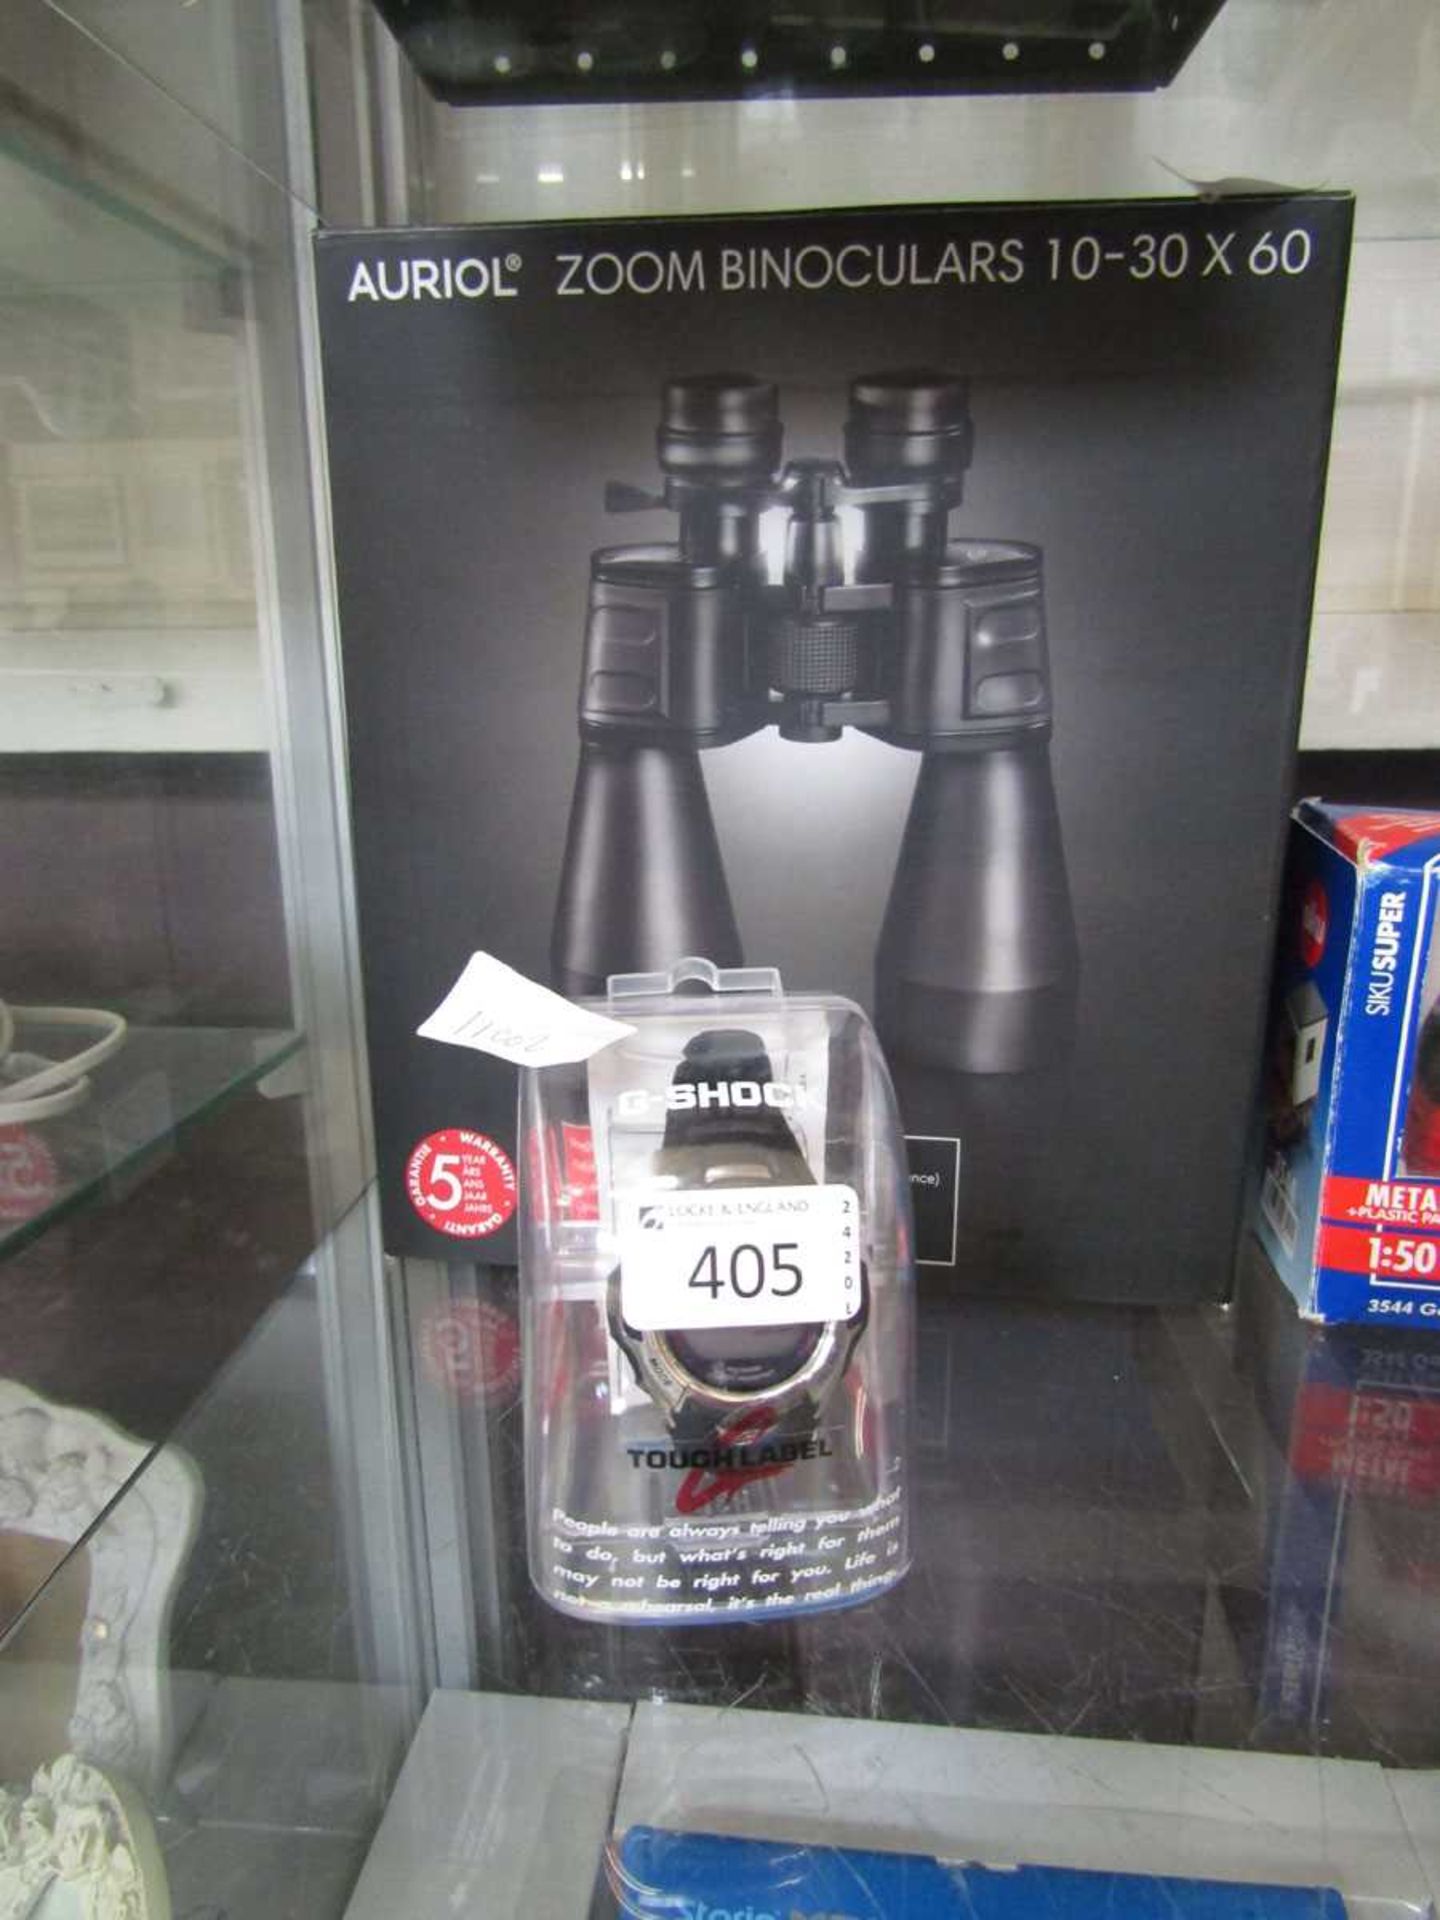 A pair of 10-30 x 60 binoculars together with a gent's Casio G-Shock watch